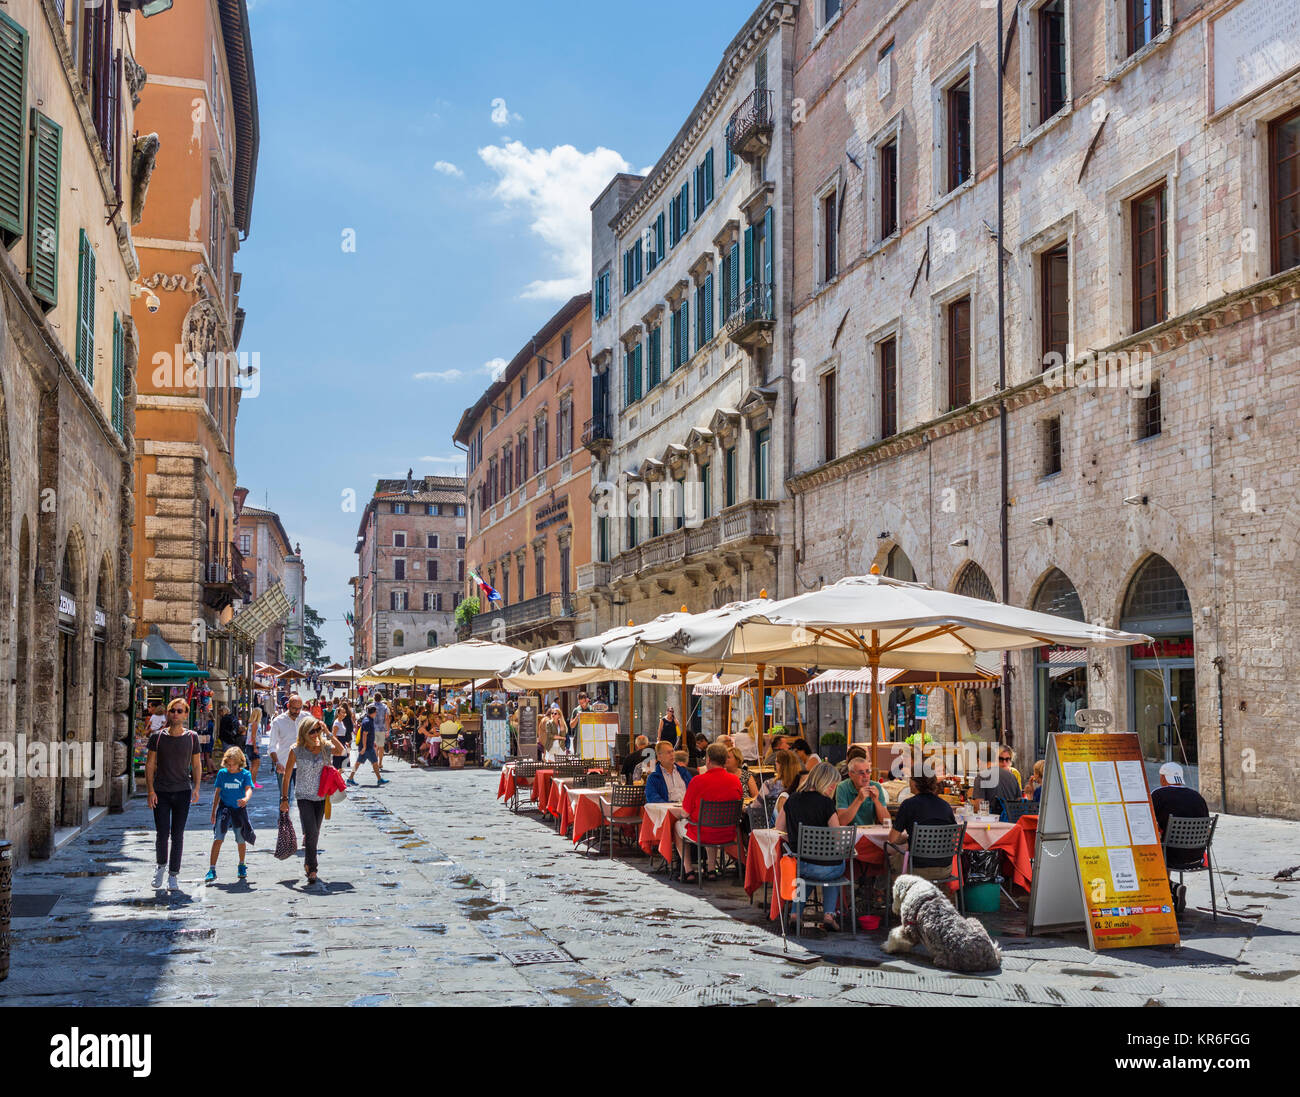 Sidewalk cafes and restaurants on the Corso Pietro Vannucci in the old town centre, Perugia, Umbria, Italy Stock Photo